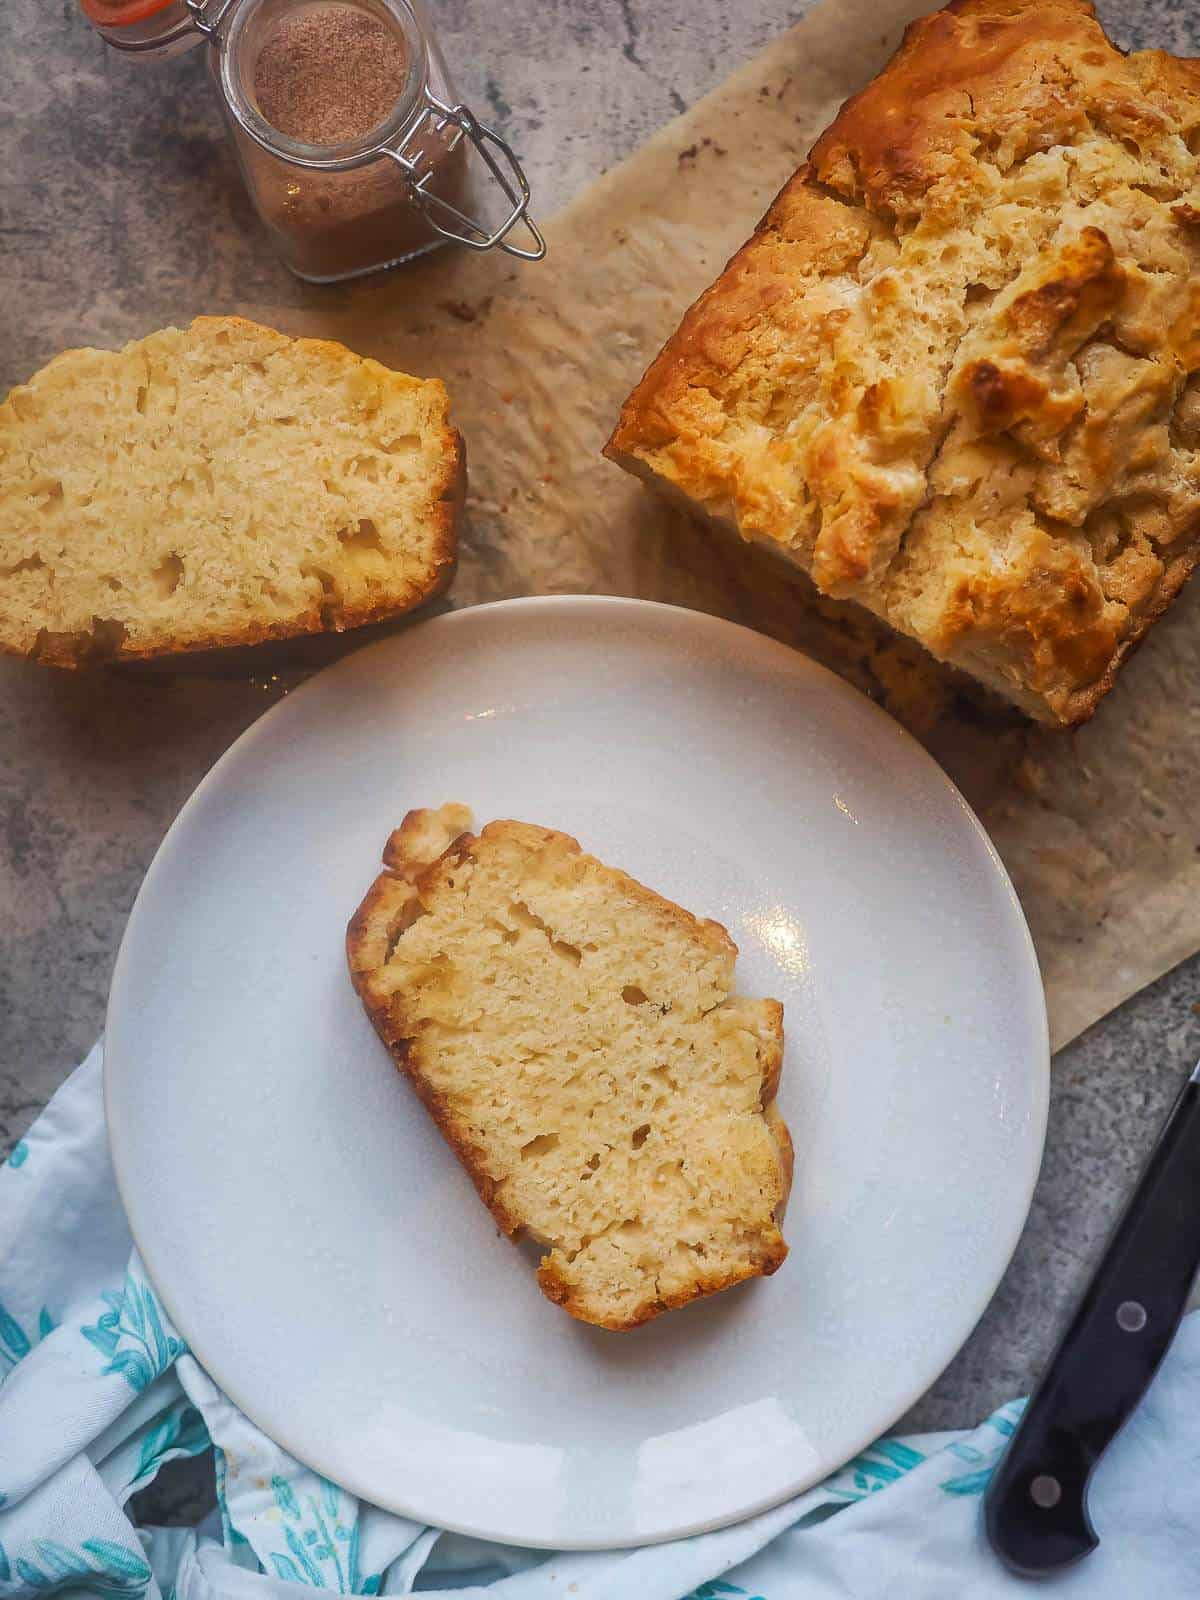 A slice of beer bread on a white plate next to the rest of the loaf.